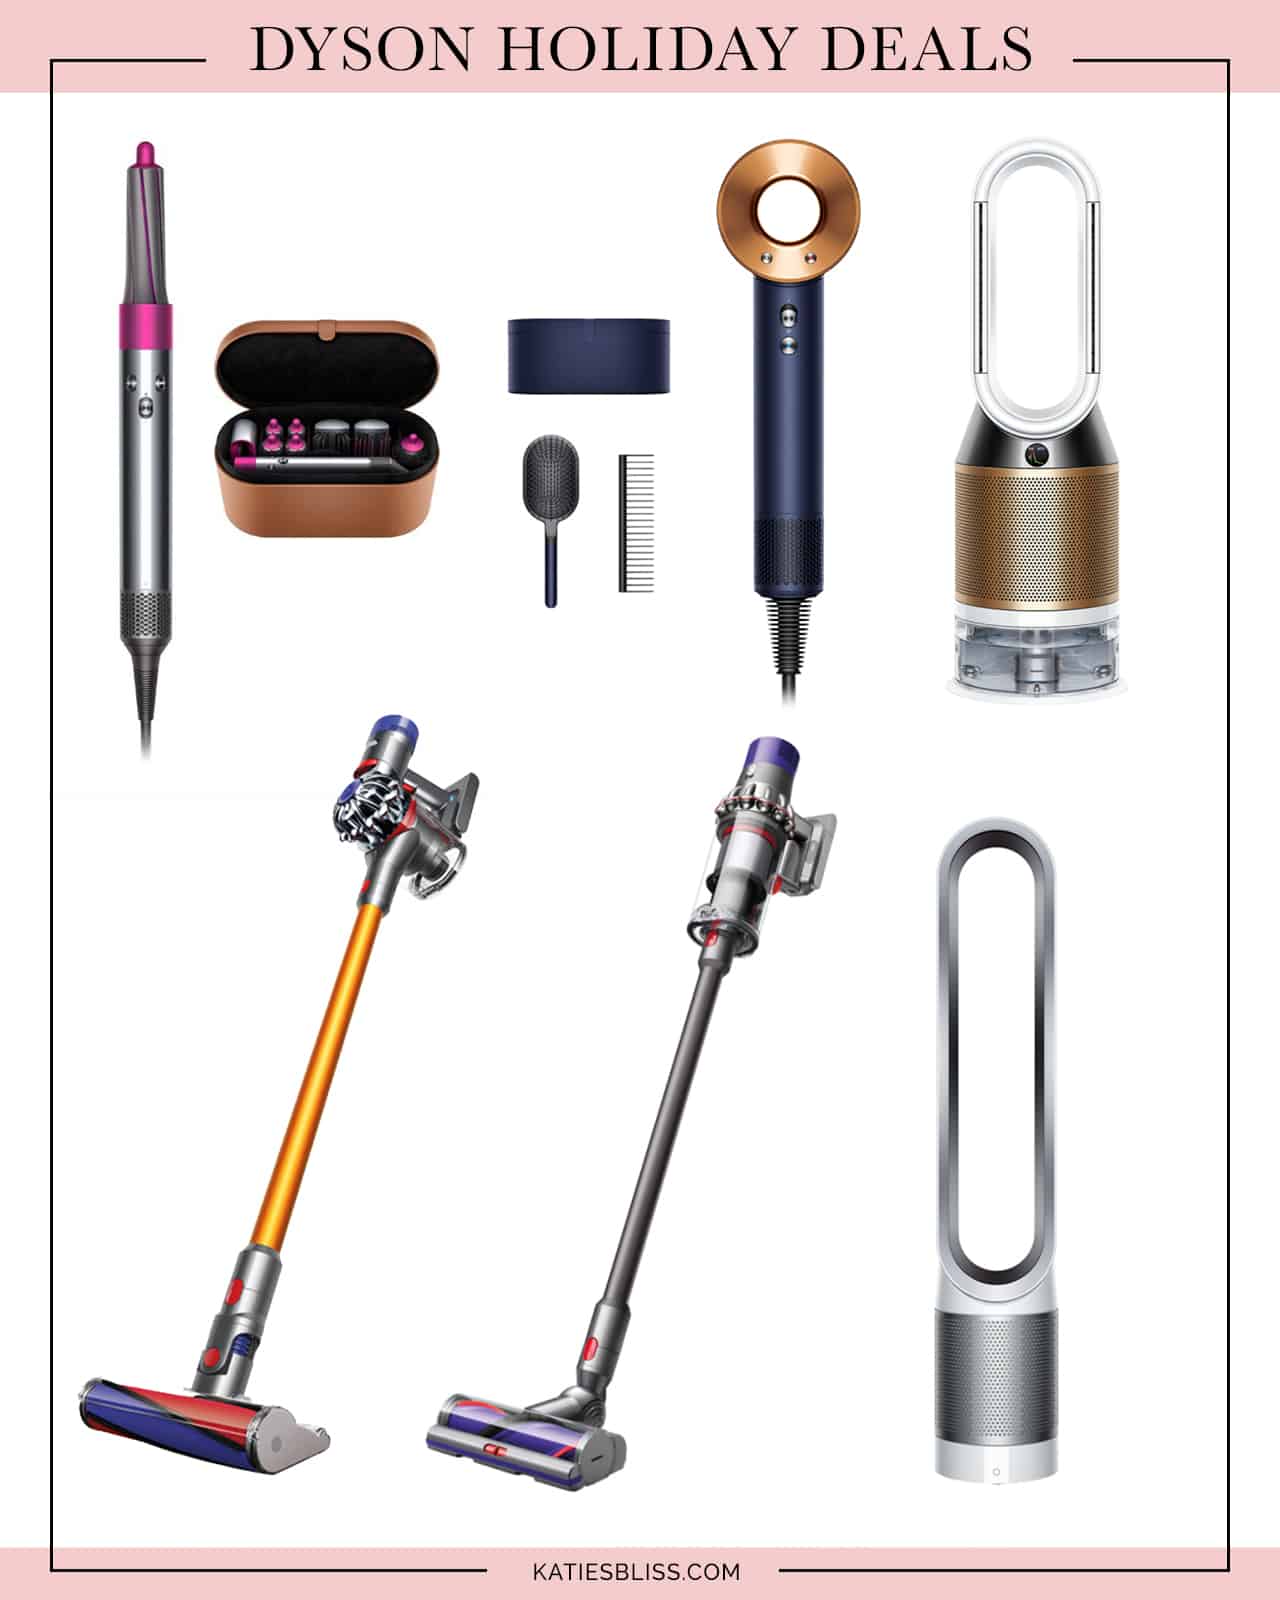 Katies Bliss Dyson Holiday Deals